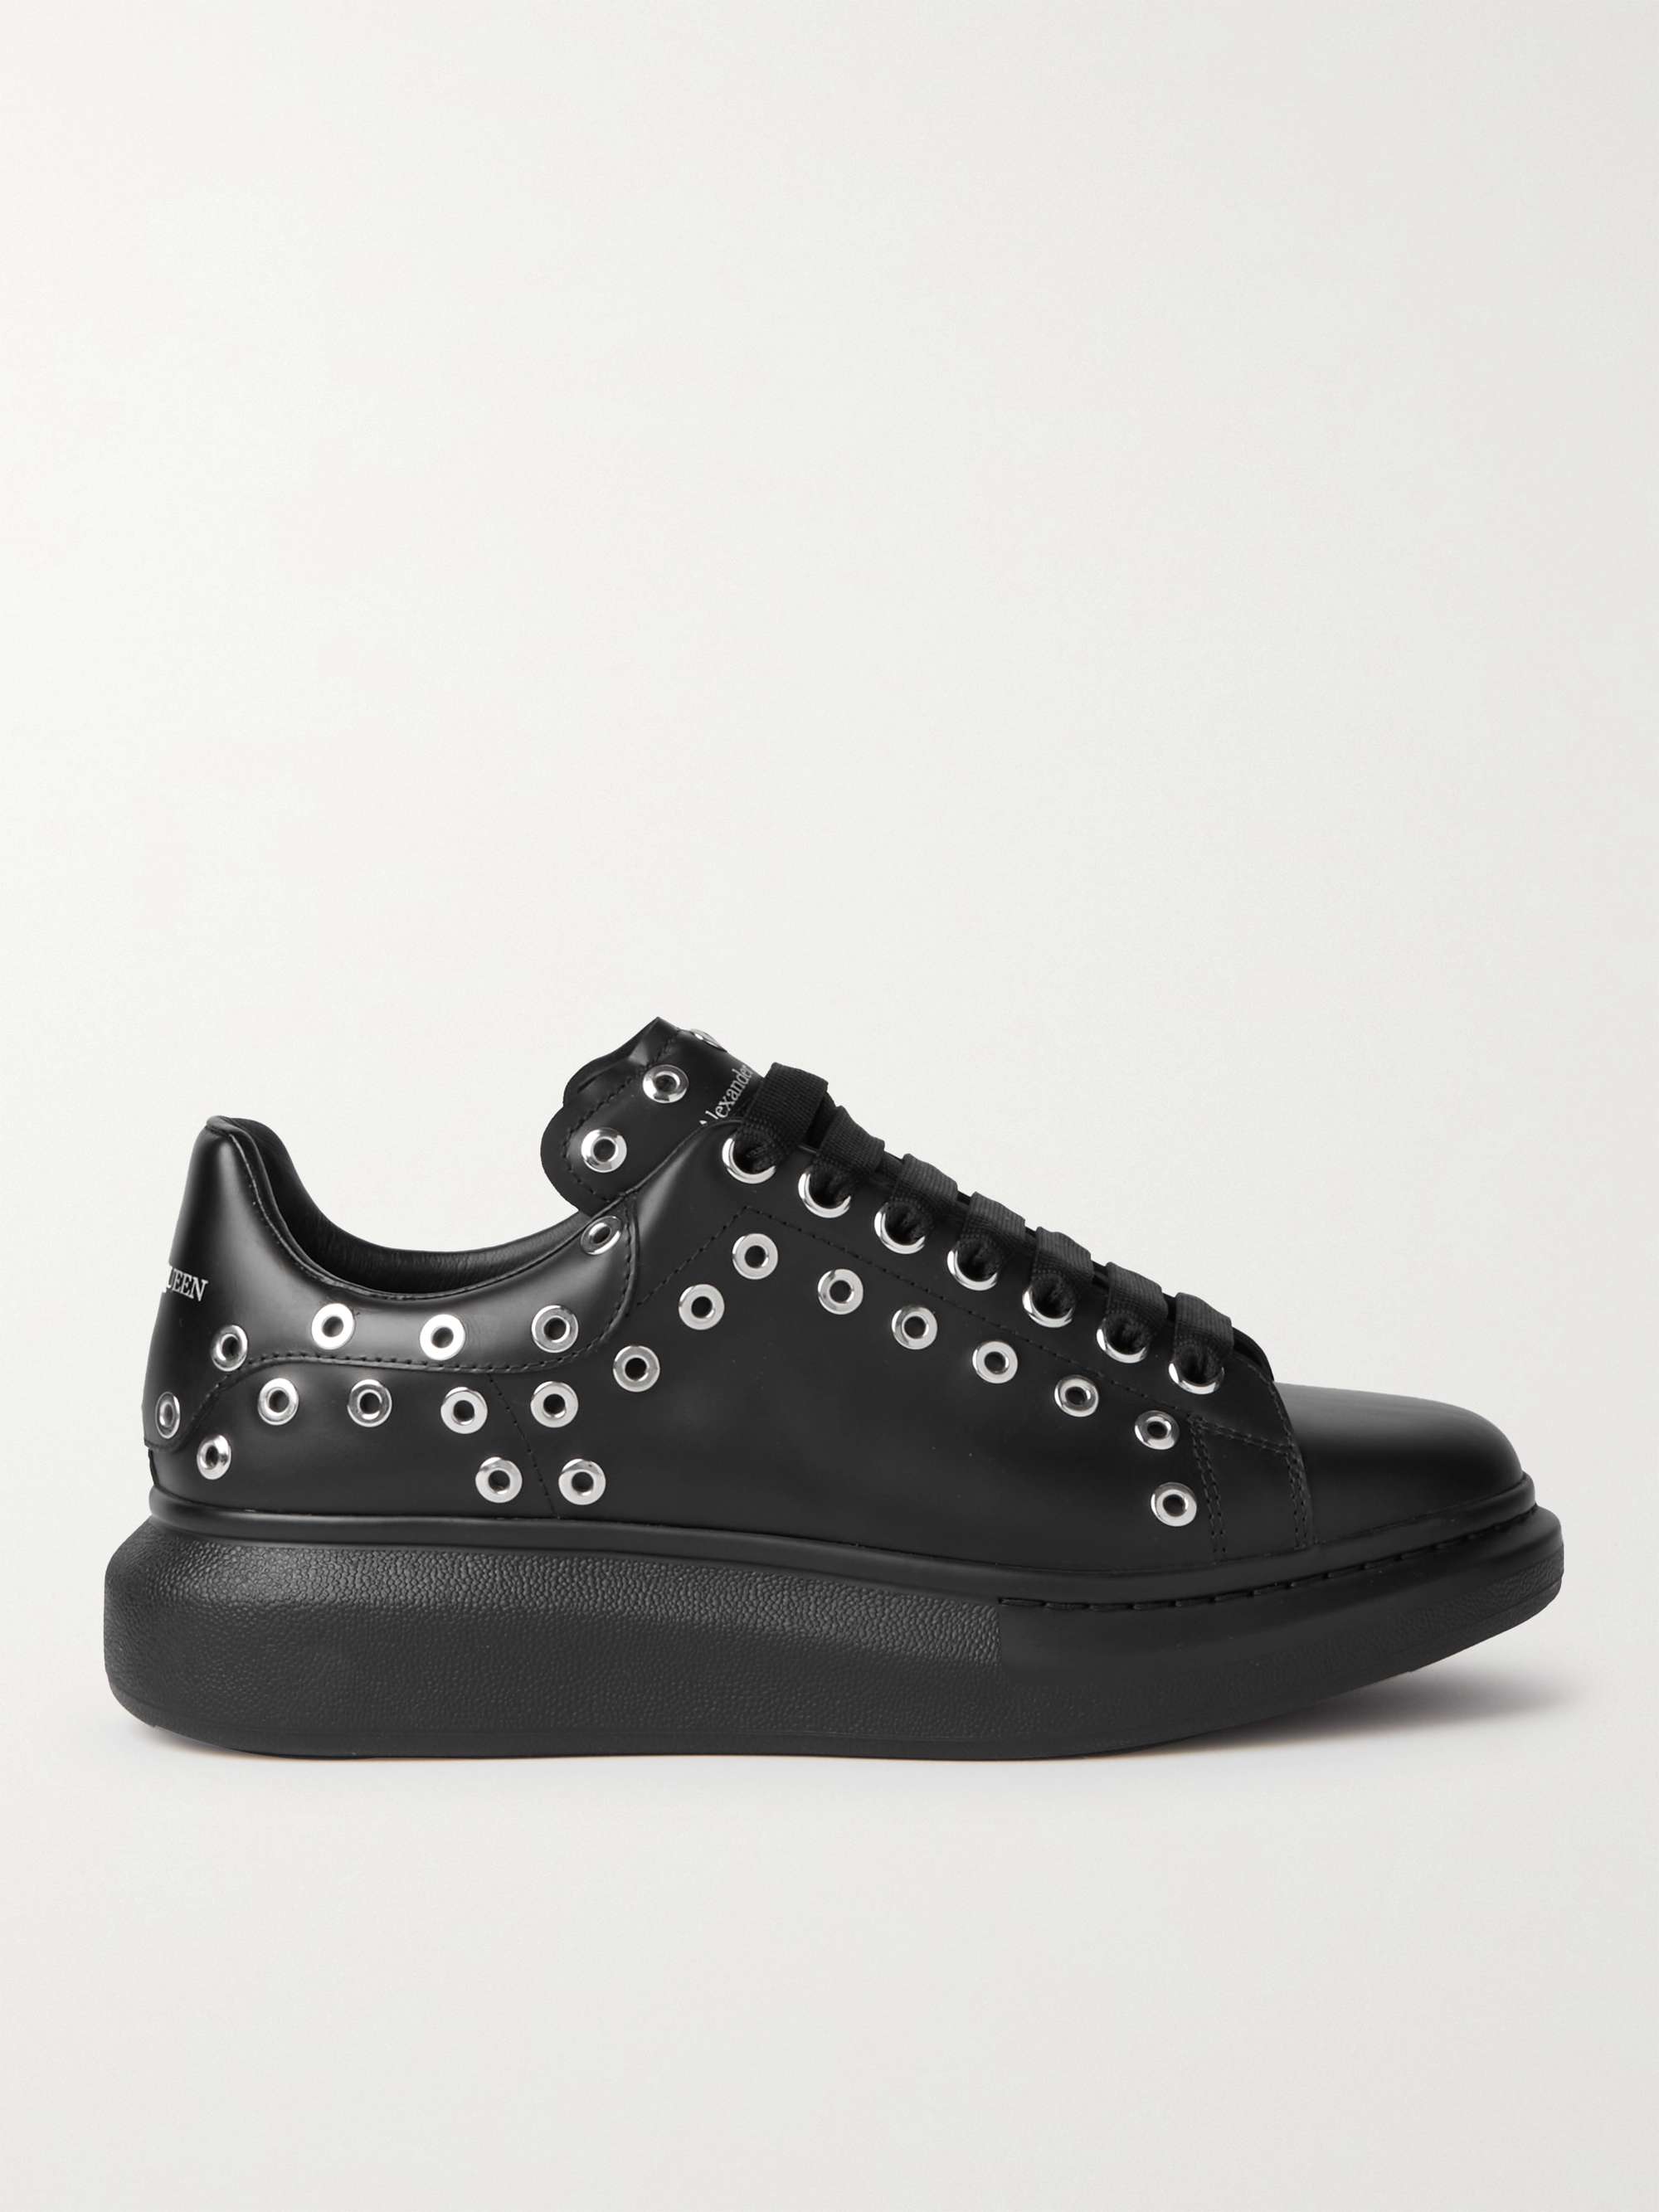 ALEXANDER MCQUEEN Exaggerated-Sole Embellished Leather Sneakers | MR PORTER